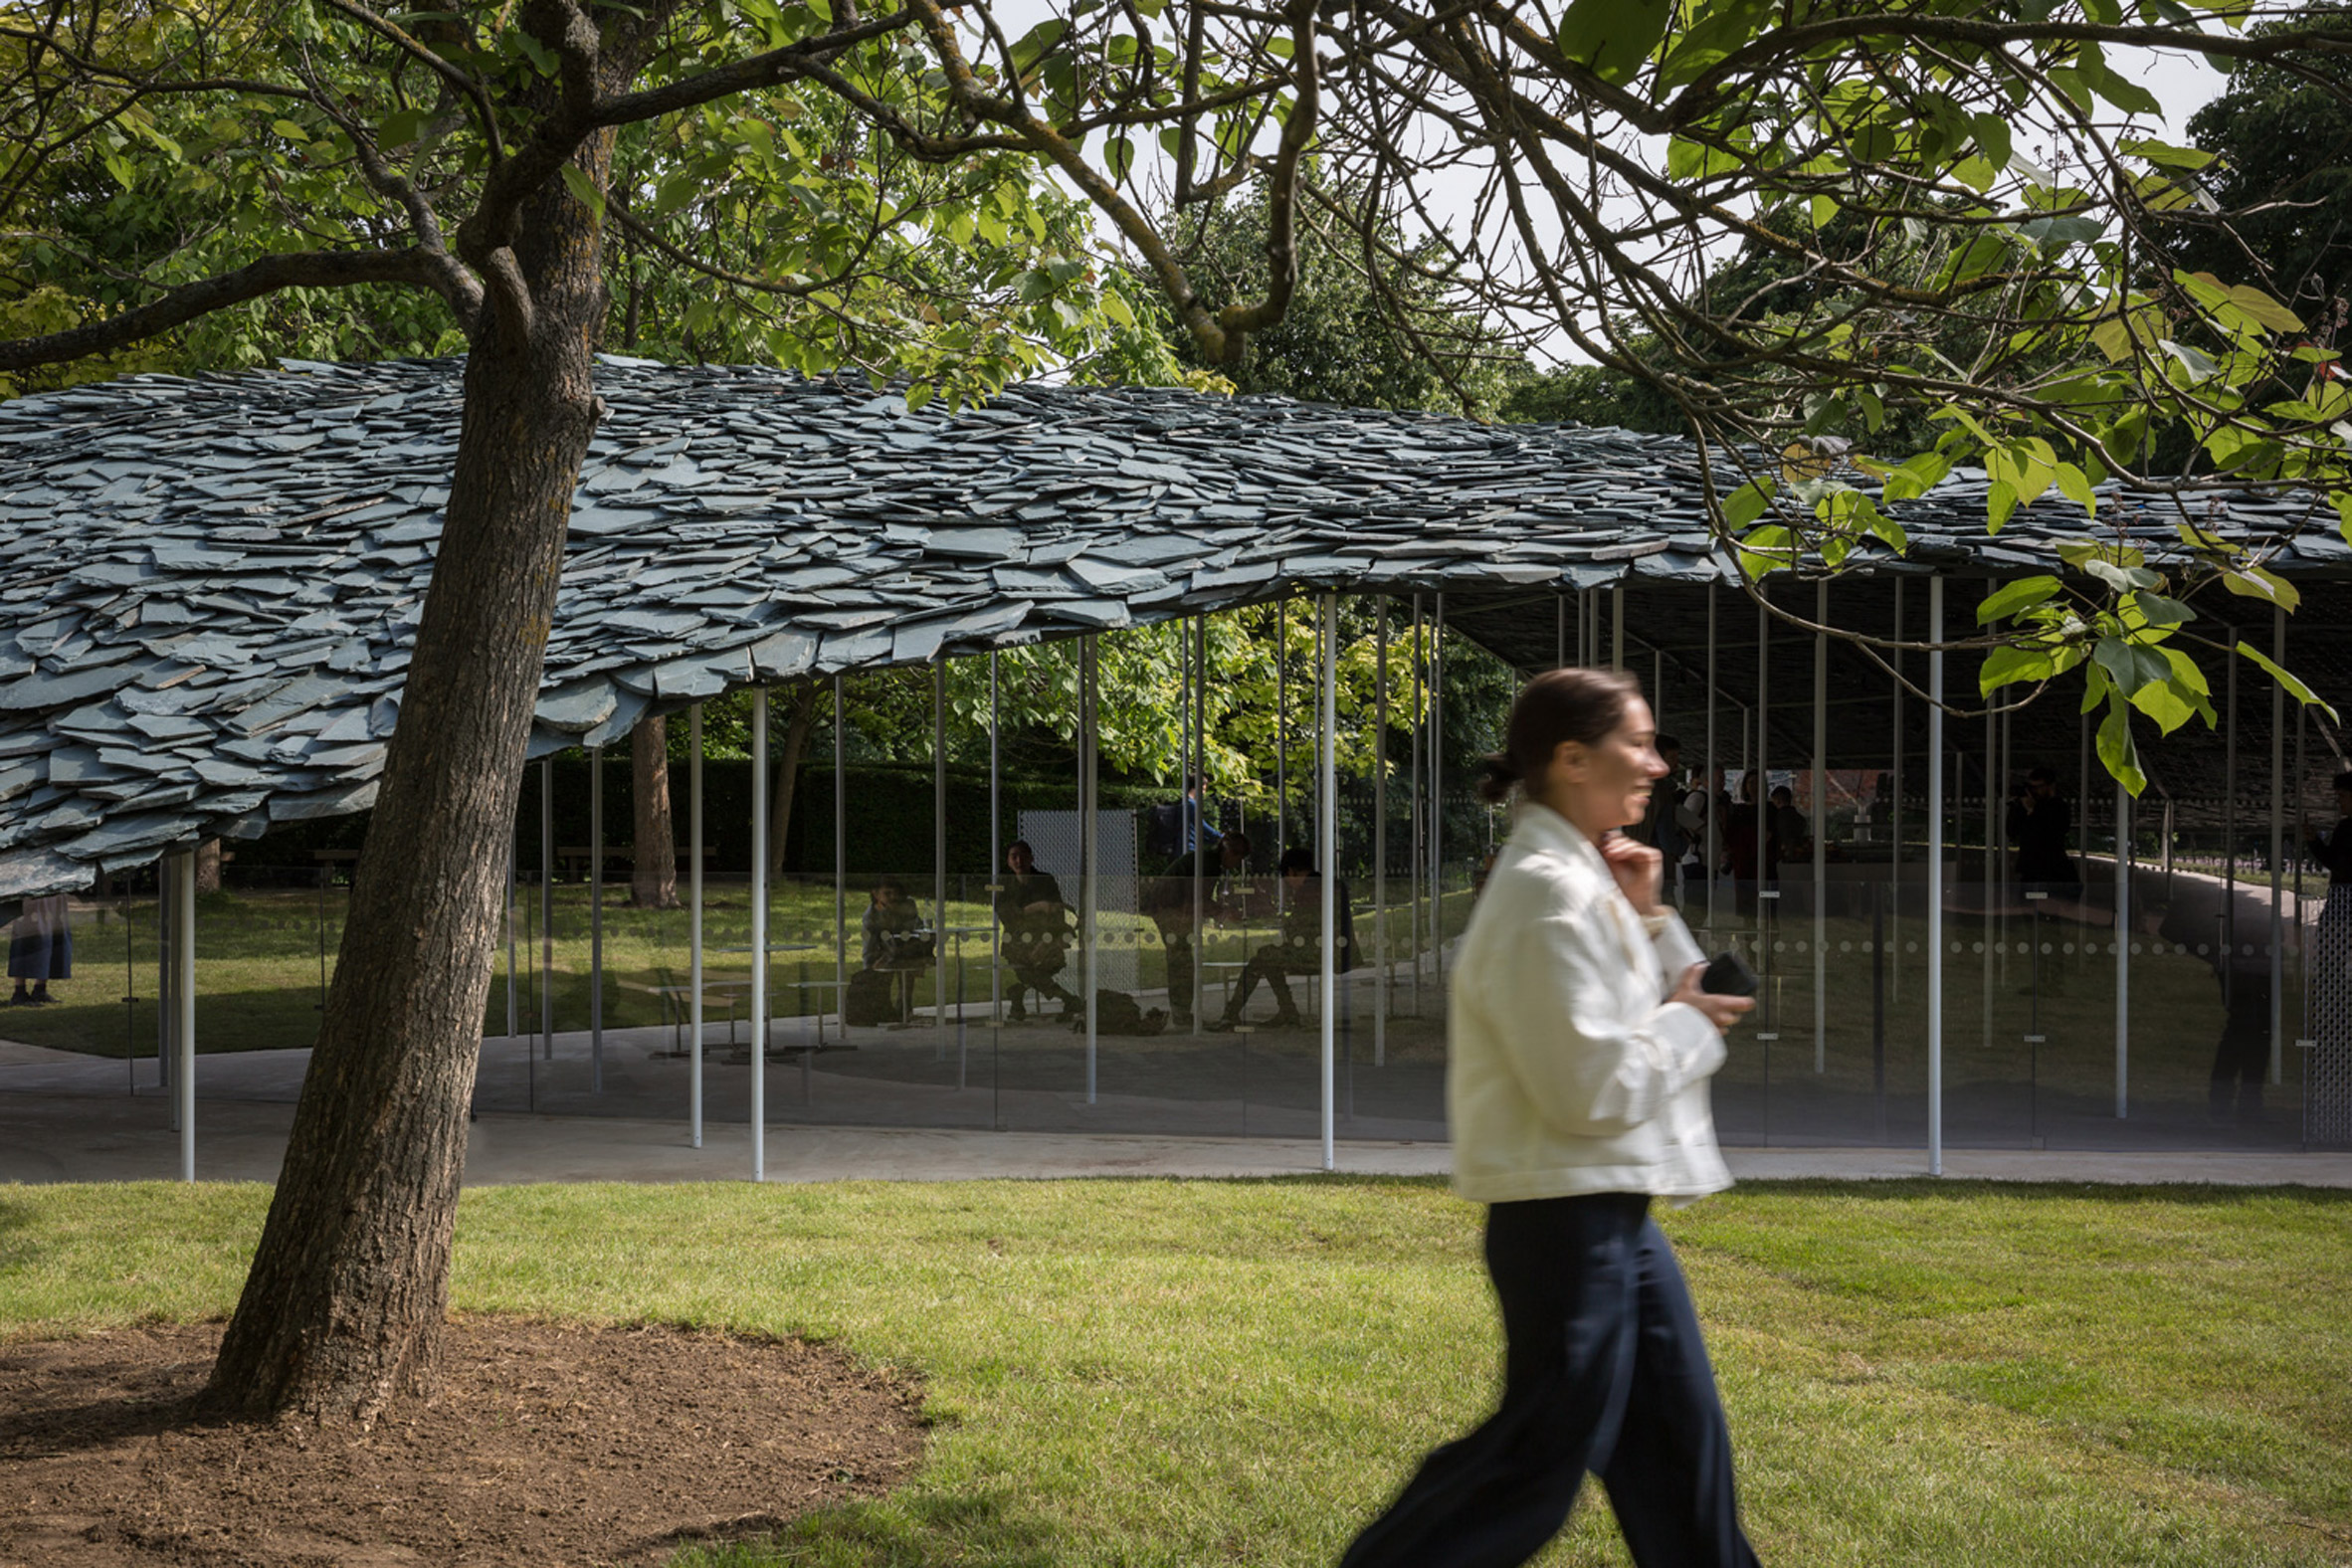 The 19th Serpentine Pavilion by Junya Ishigami with the Concept of “Free Space”